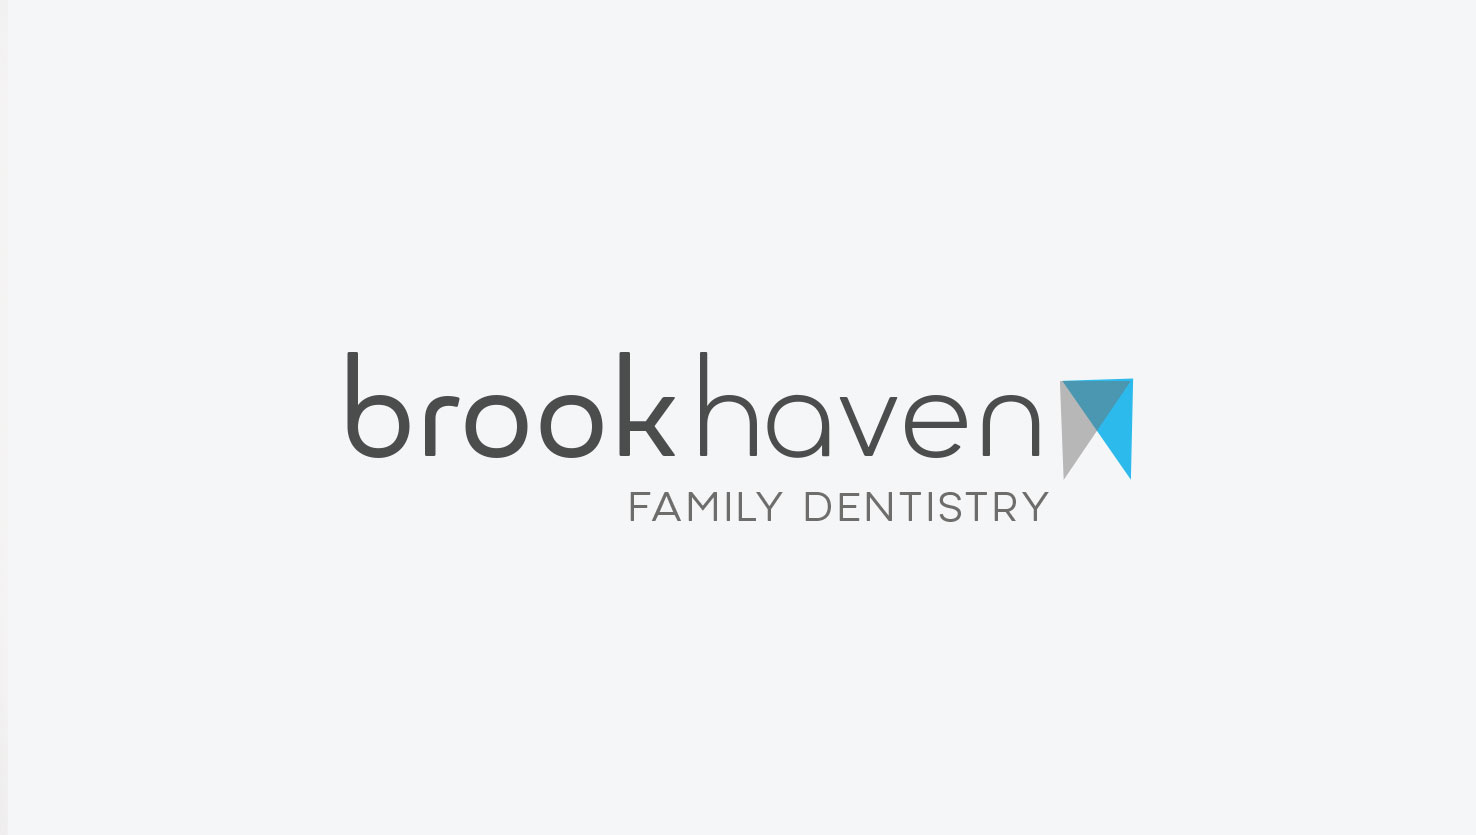 Brookhaven Family Dentistry